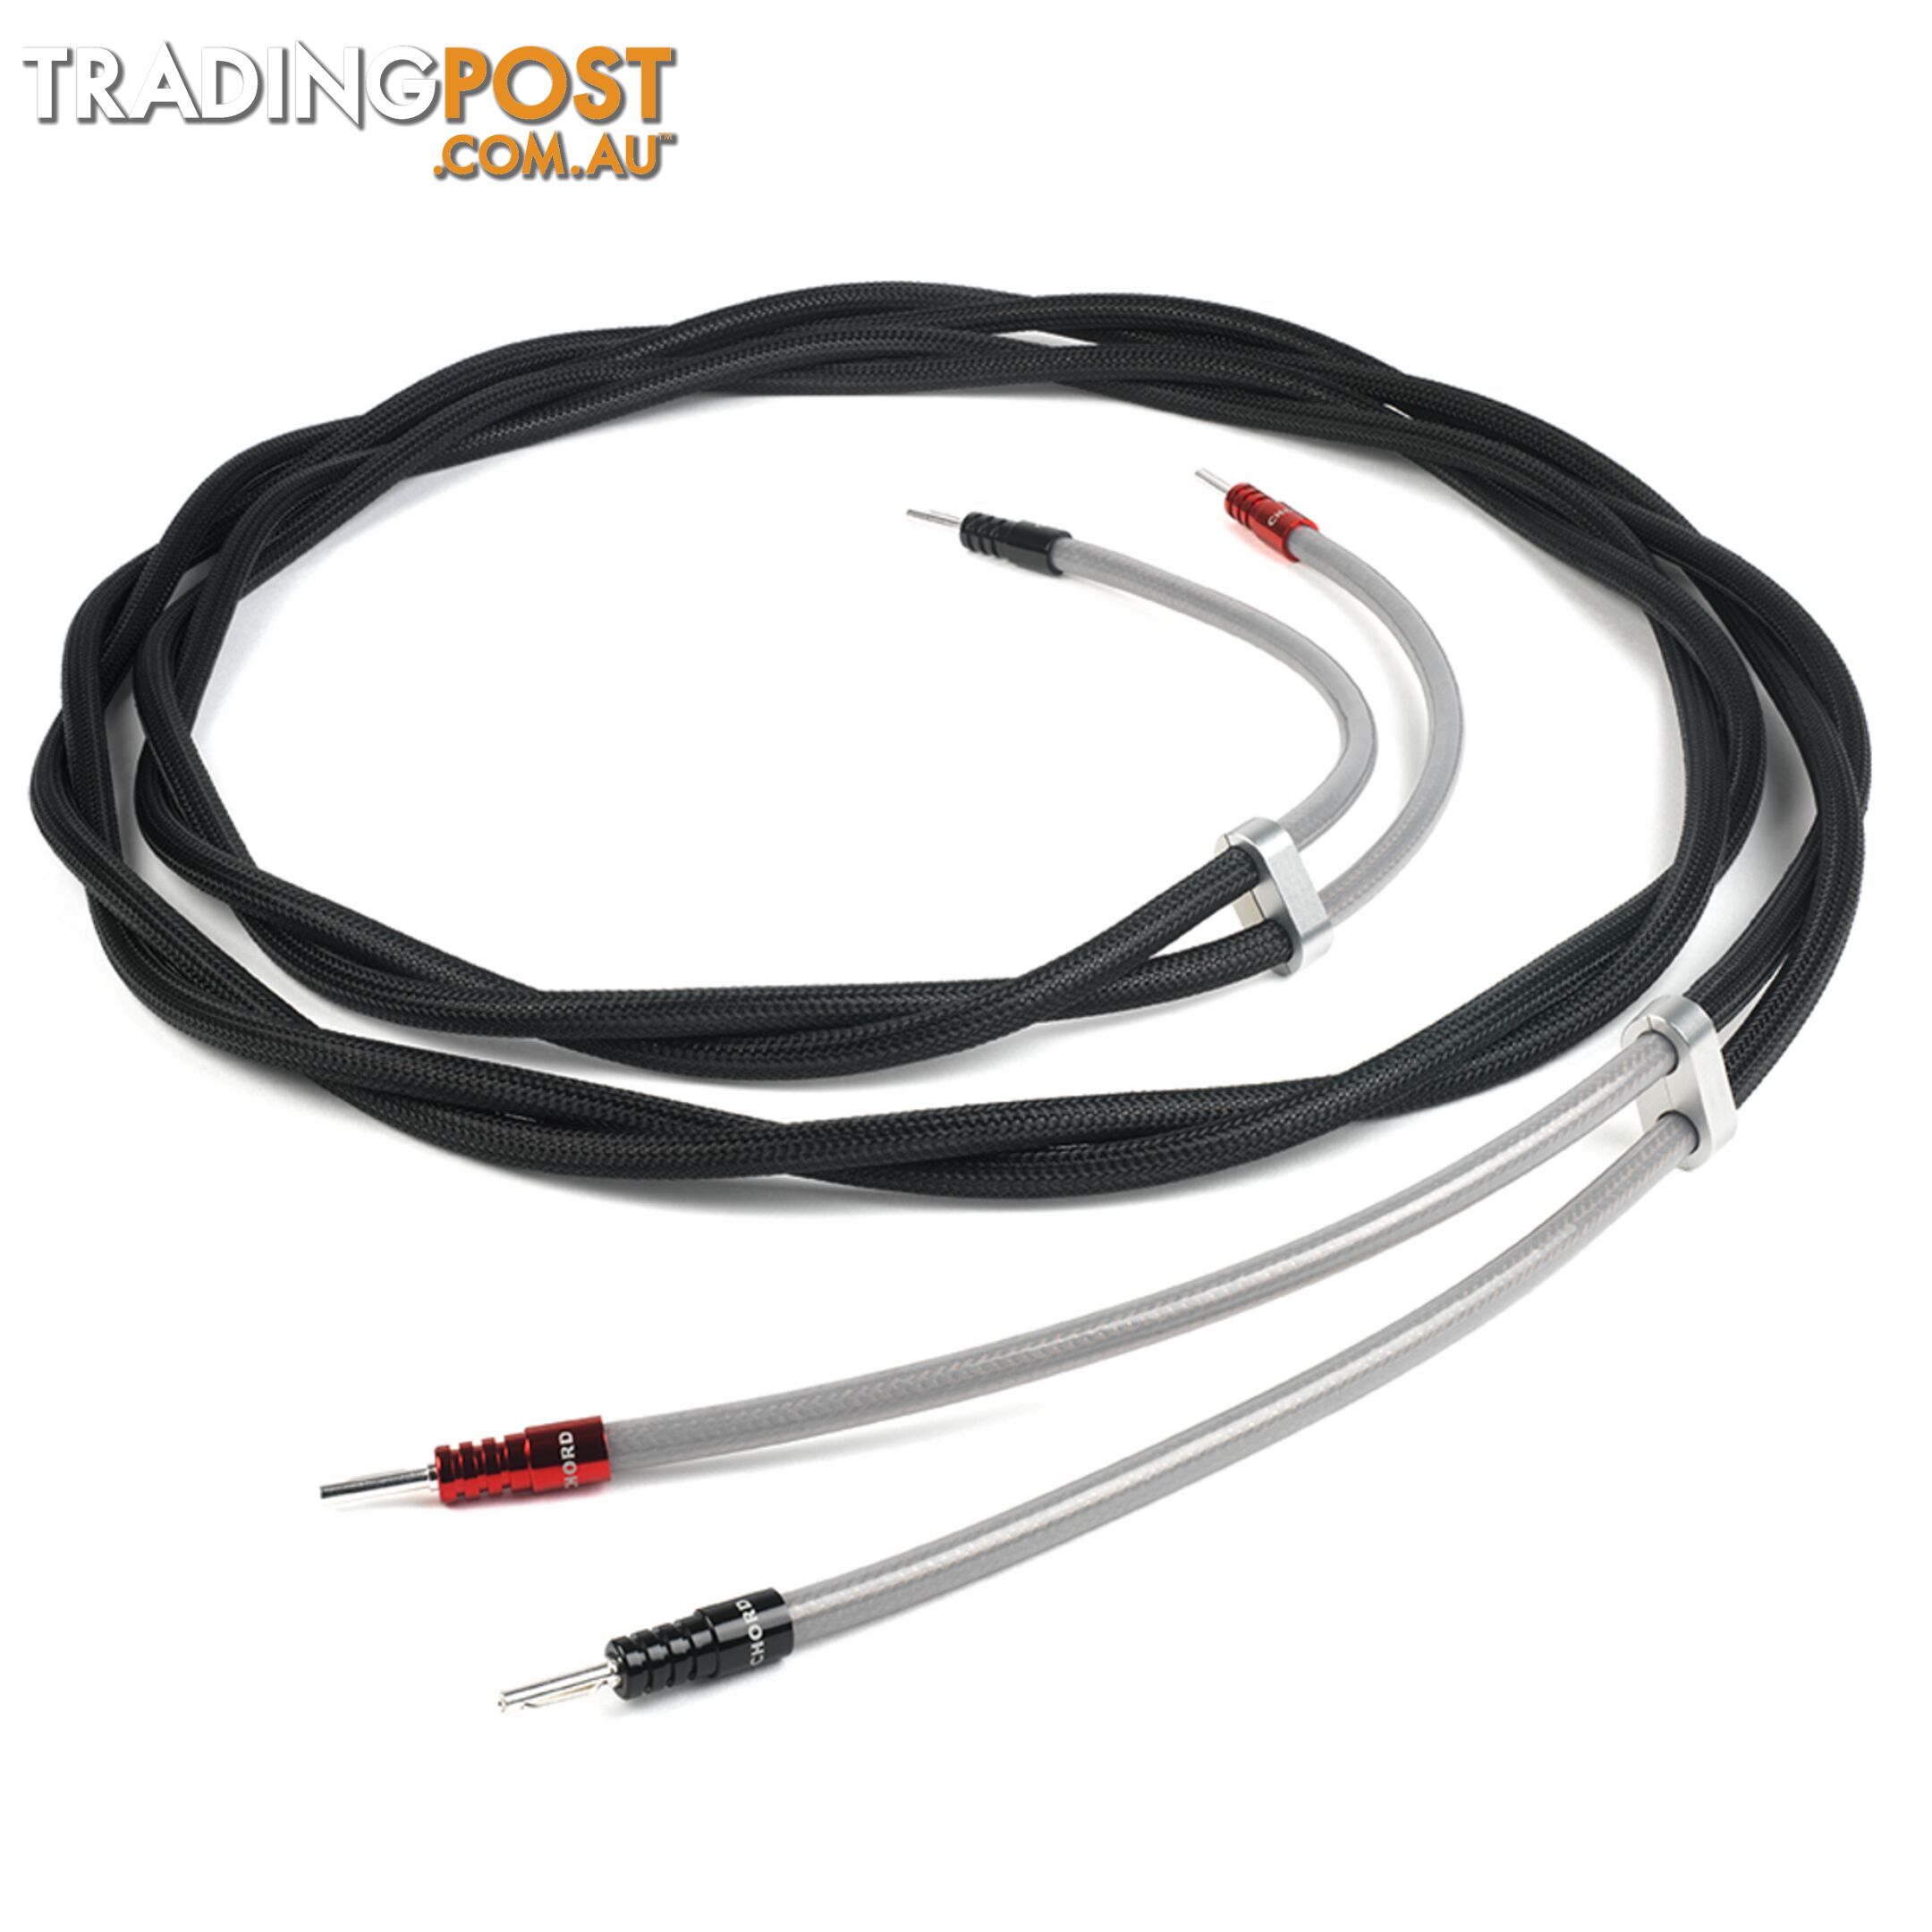 Chord Signature XL High-End Speaker Cable 3m (Pair)